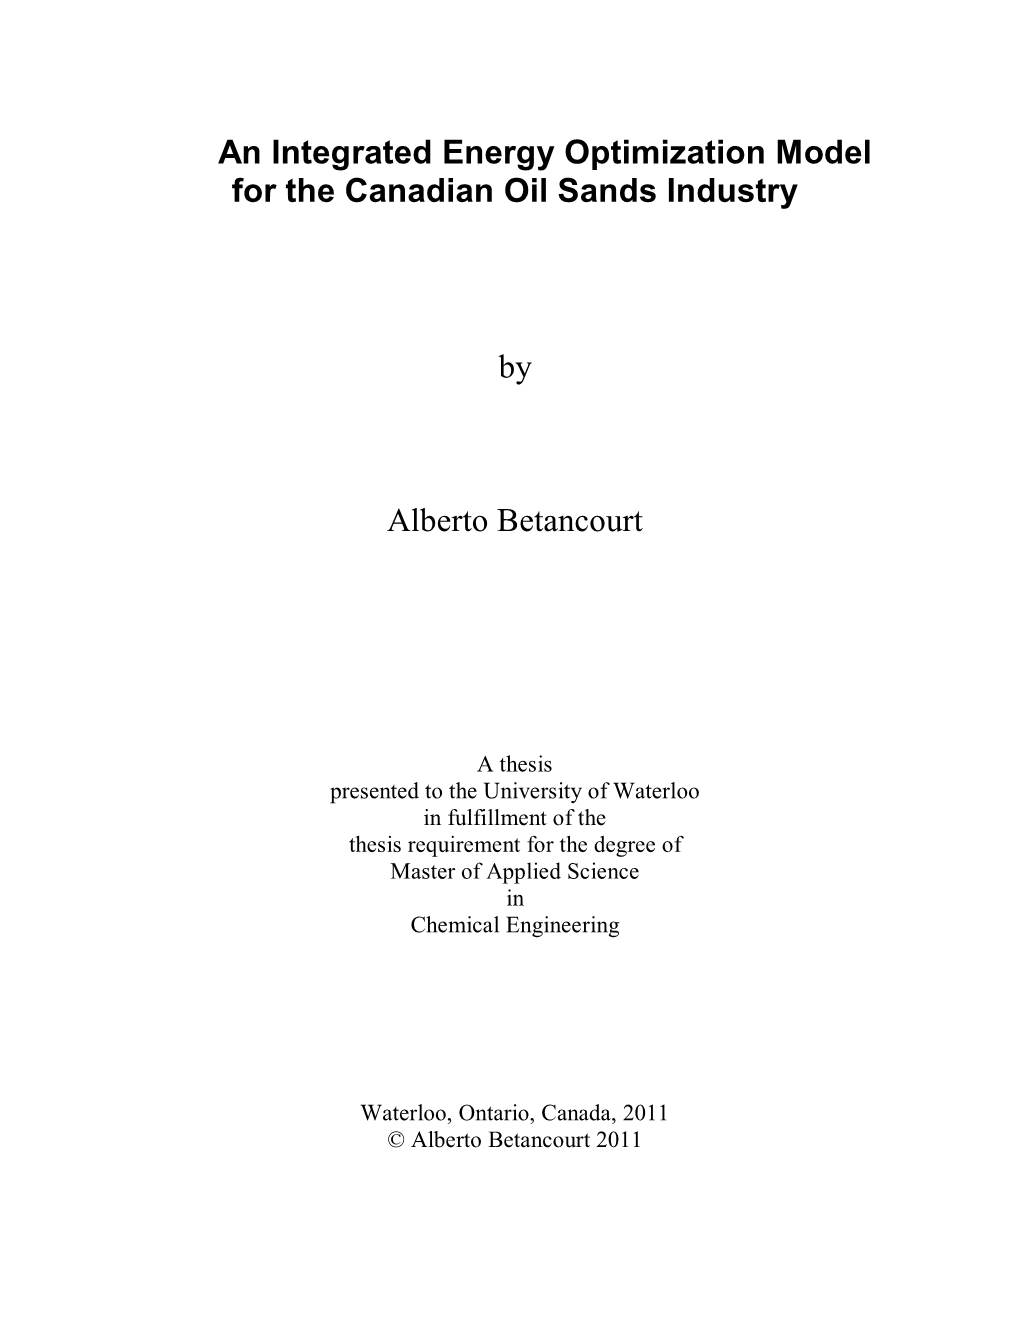 An Integrated Energy Optimization Model for the Canadian Oil Sands Industry